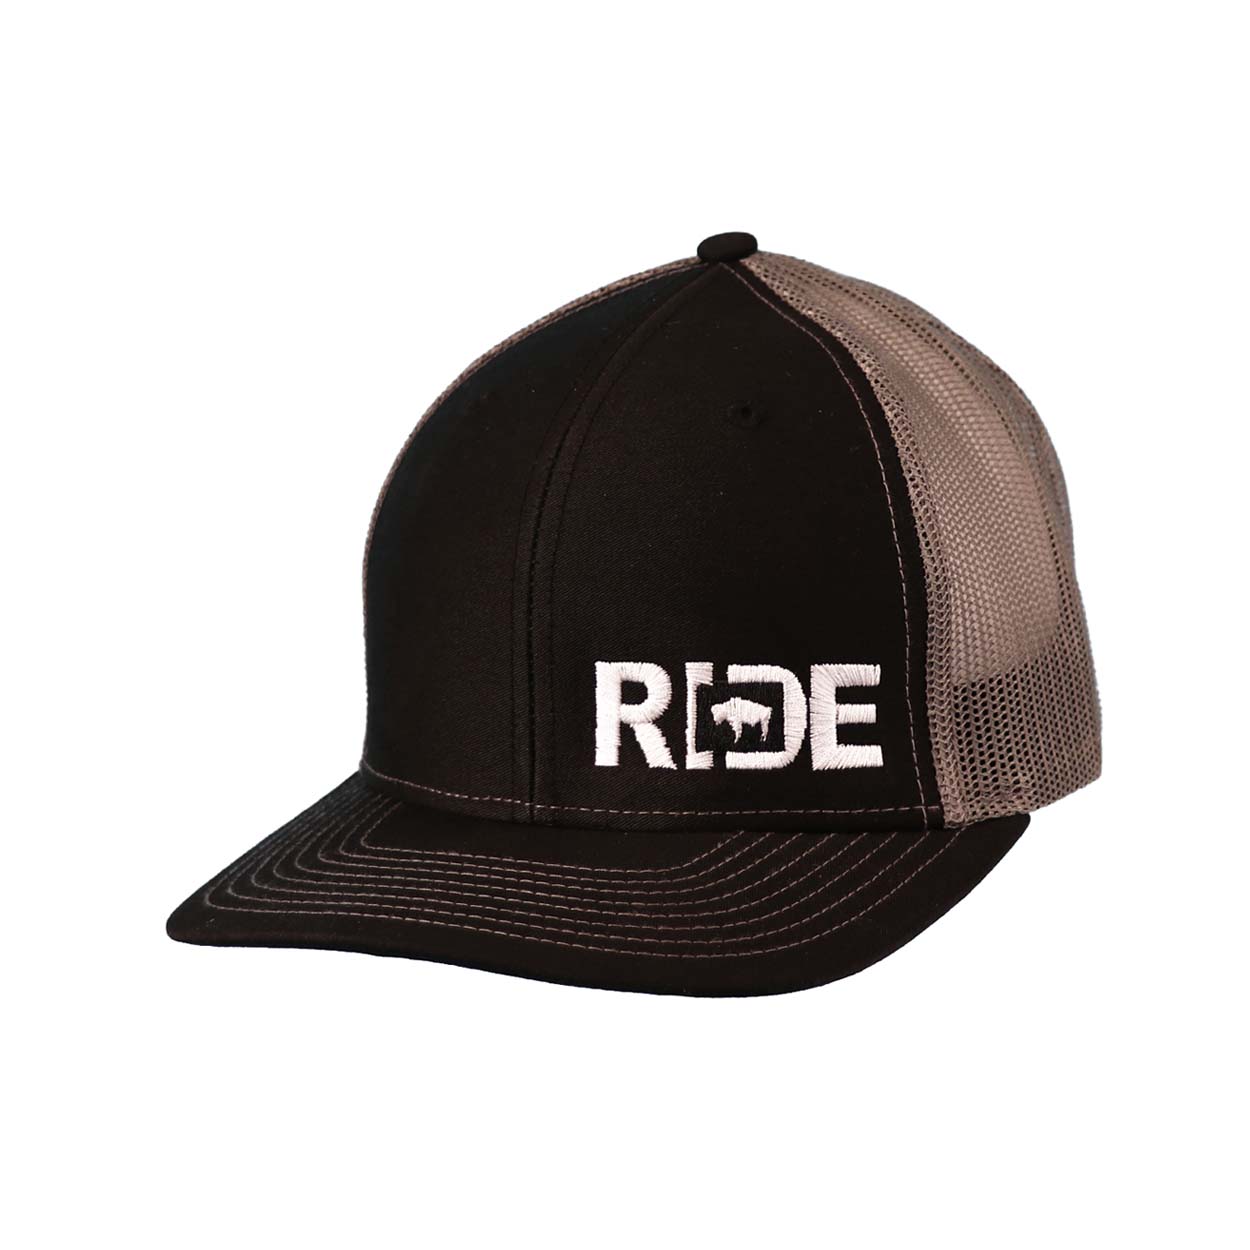 Ride Wyoming Night Out Pro Embroidered Snapback Trucker Hat Black/Gray